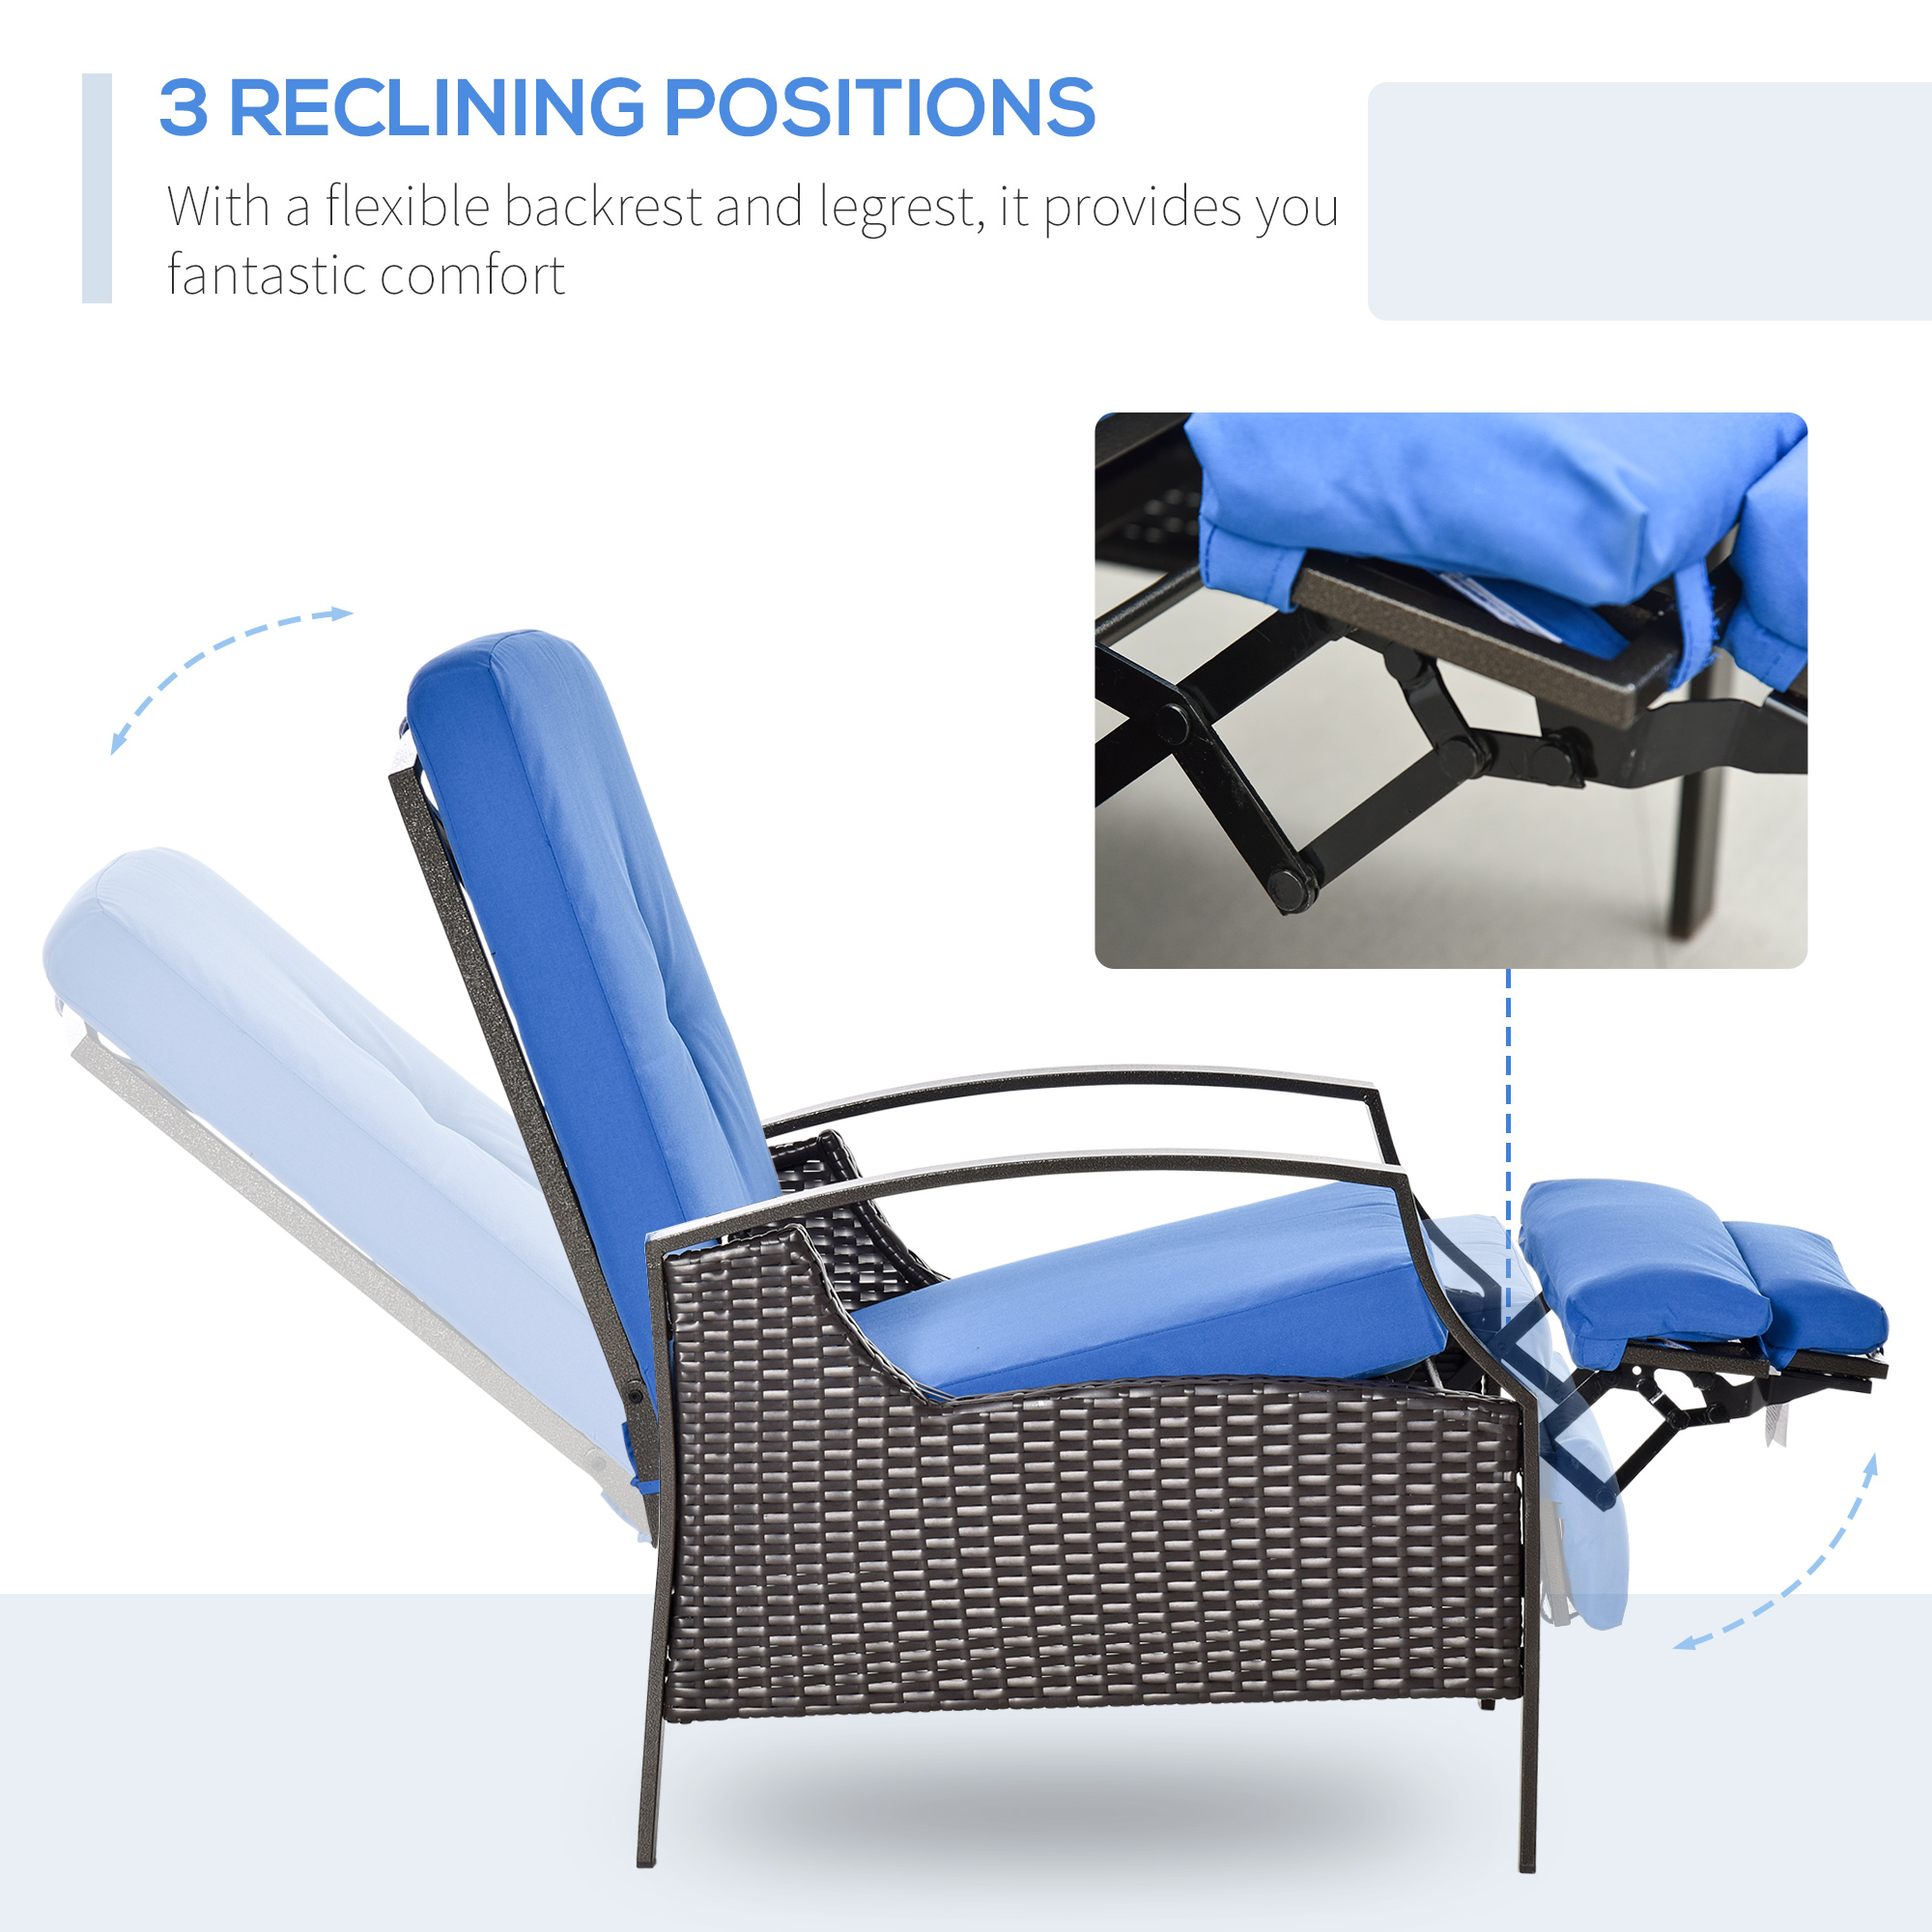 Outsunny Outdoor Recliner, Reclining Chair w/ Footrest & Cushions, Blue - image 4 of 9